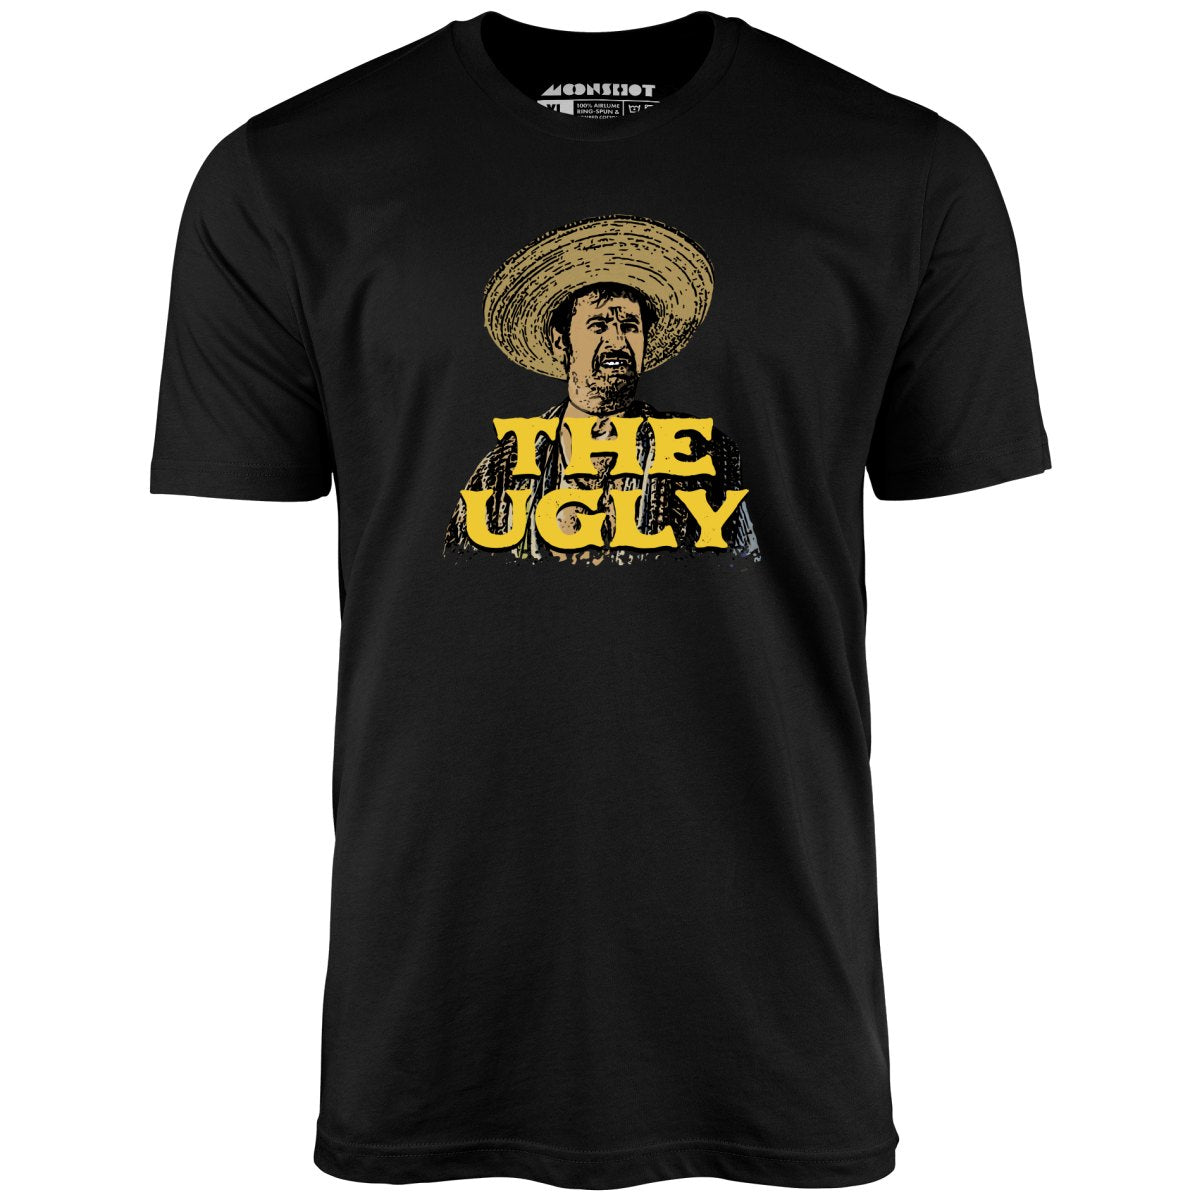 The Ugly - Unisex T-Shirt